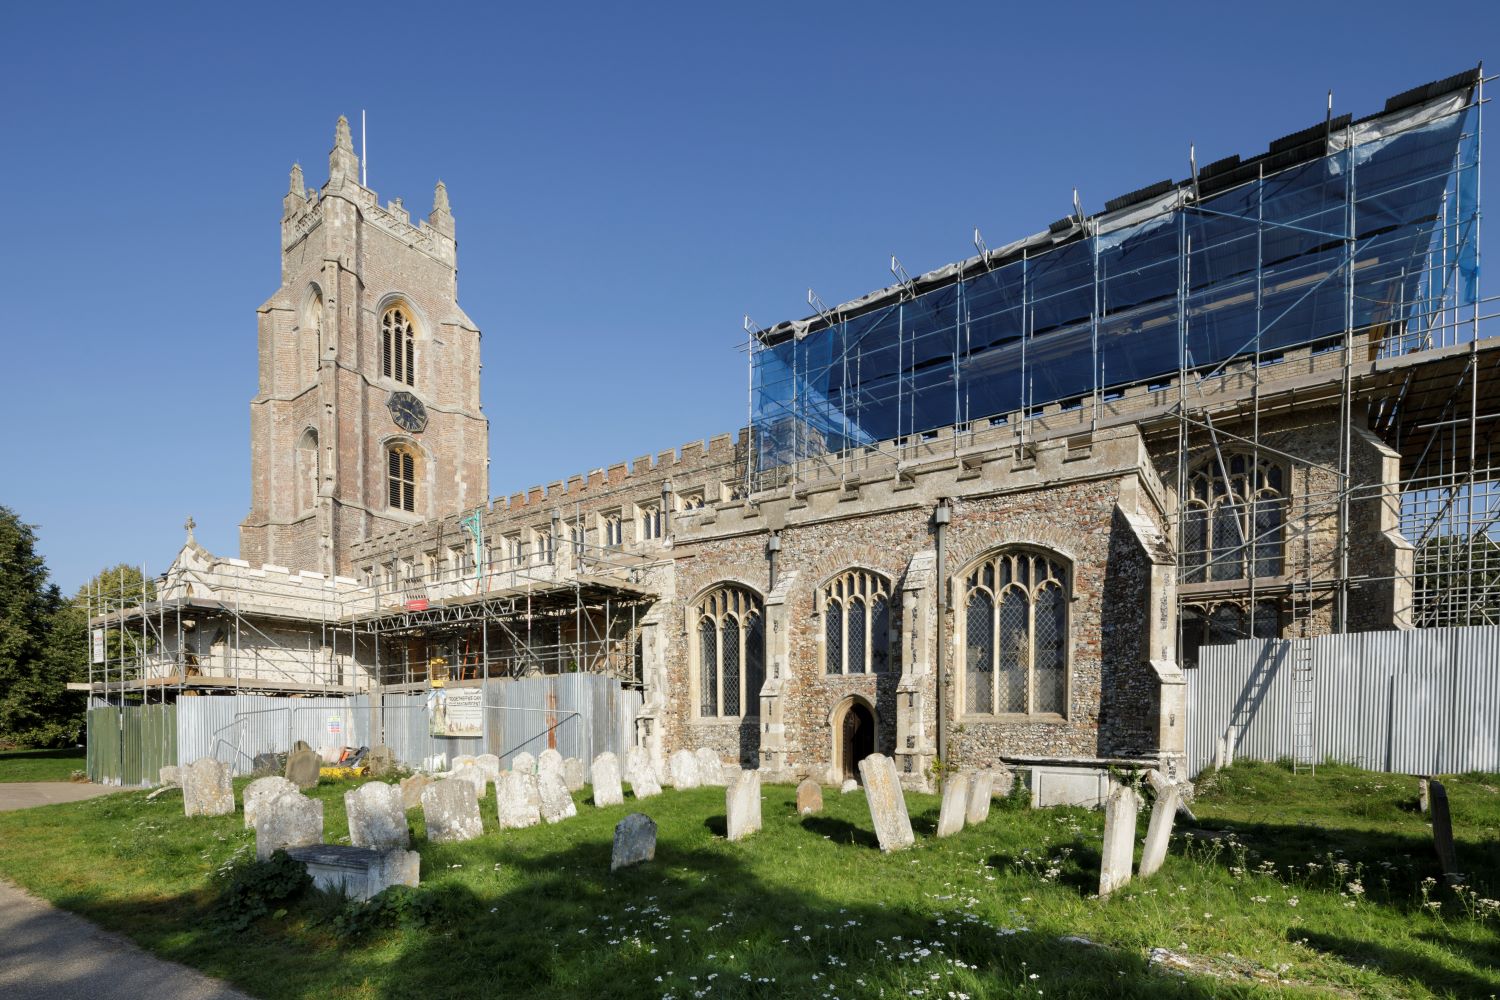 The side view of the church shows scaffolding at the right side of the church and a small graveyard in front of the church.